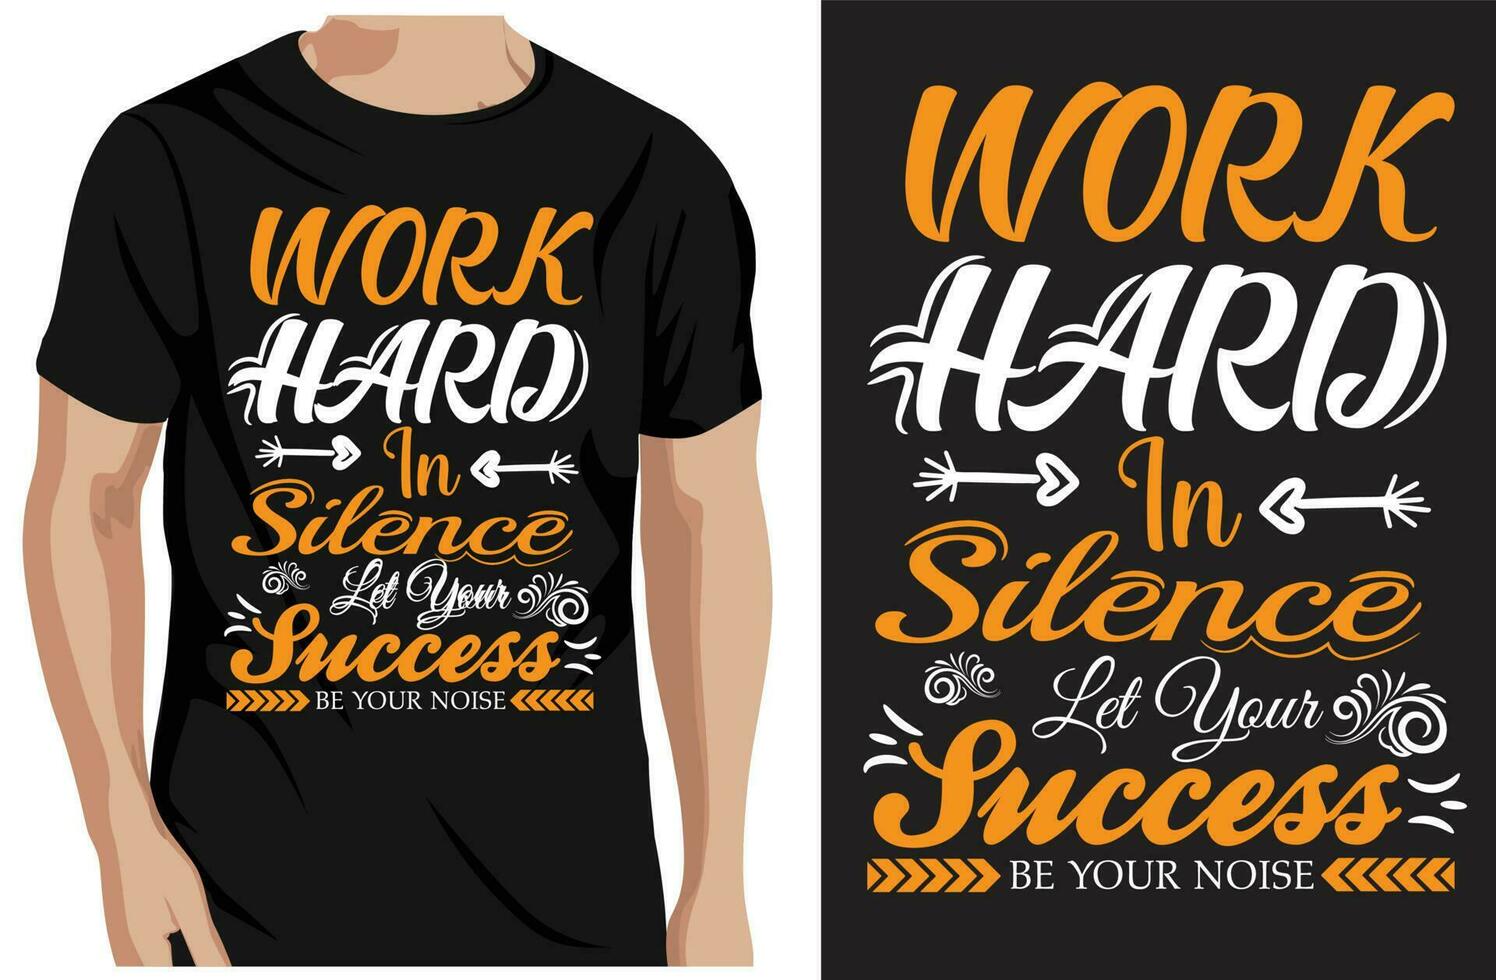 Work hard in silence let success make the noise, typography t-shirt design and template vector